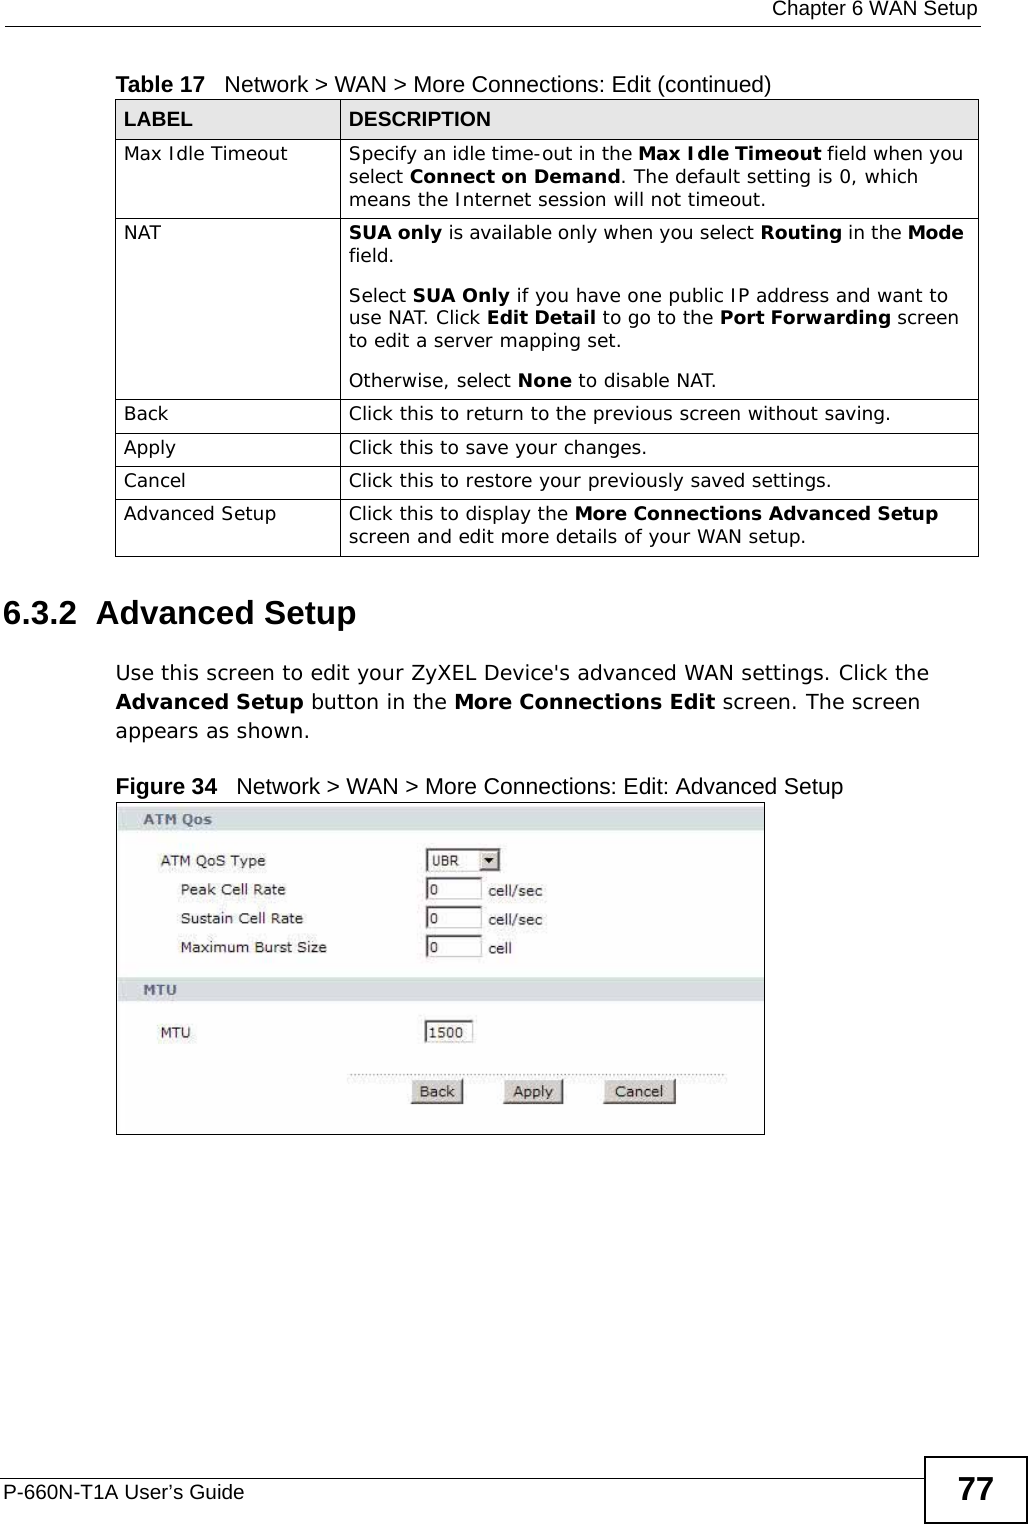  Chapter 6 WAN SetupP-660N-T1A User’s Guide 776.3.2  Advanced Setup Use this screen to edit your ZyXEL Device&apos;s advanced WAN settings. Click the Advanced Setup button in the More Connections Edit screen. The screen appears as shown.Figure 34   Network &gt; WAN &gt; More Connections: Edit: Advanced SetupMax Idle Timeout Specify an idle time-out in the Max Idle Timeout field when you select Connect on Demand. The default setting is 0, which means the Internet session will not timeout.NAT SUA only is available only when you select Routing in the Mode field.Select SUA Only if you have one public IP address and want to use NAT. Click Edit Detail to go to the Port Forwarding screen to edit a server mapping set. Otherwise, select None to disable NAT.Back Click this to return to the previous screen without saving.Apply Click this to save your changes. Cancel Click this to restore your previously saved settings.Advanced Setup Click this to display the More Connections Advanced Setup screen and edit more details of your WAN setup.Table 17   Network &gt; WAN &gt; More Connections: Edit (continued)LABEL DESCRIPTION